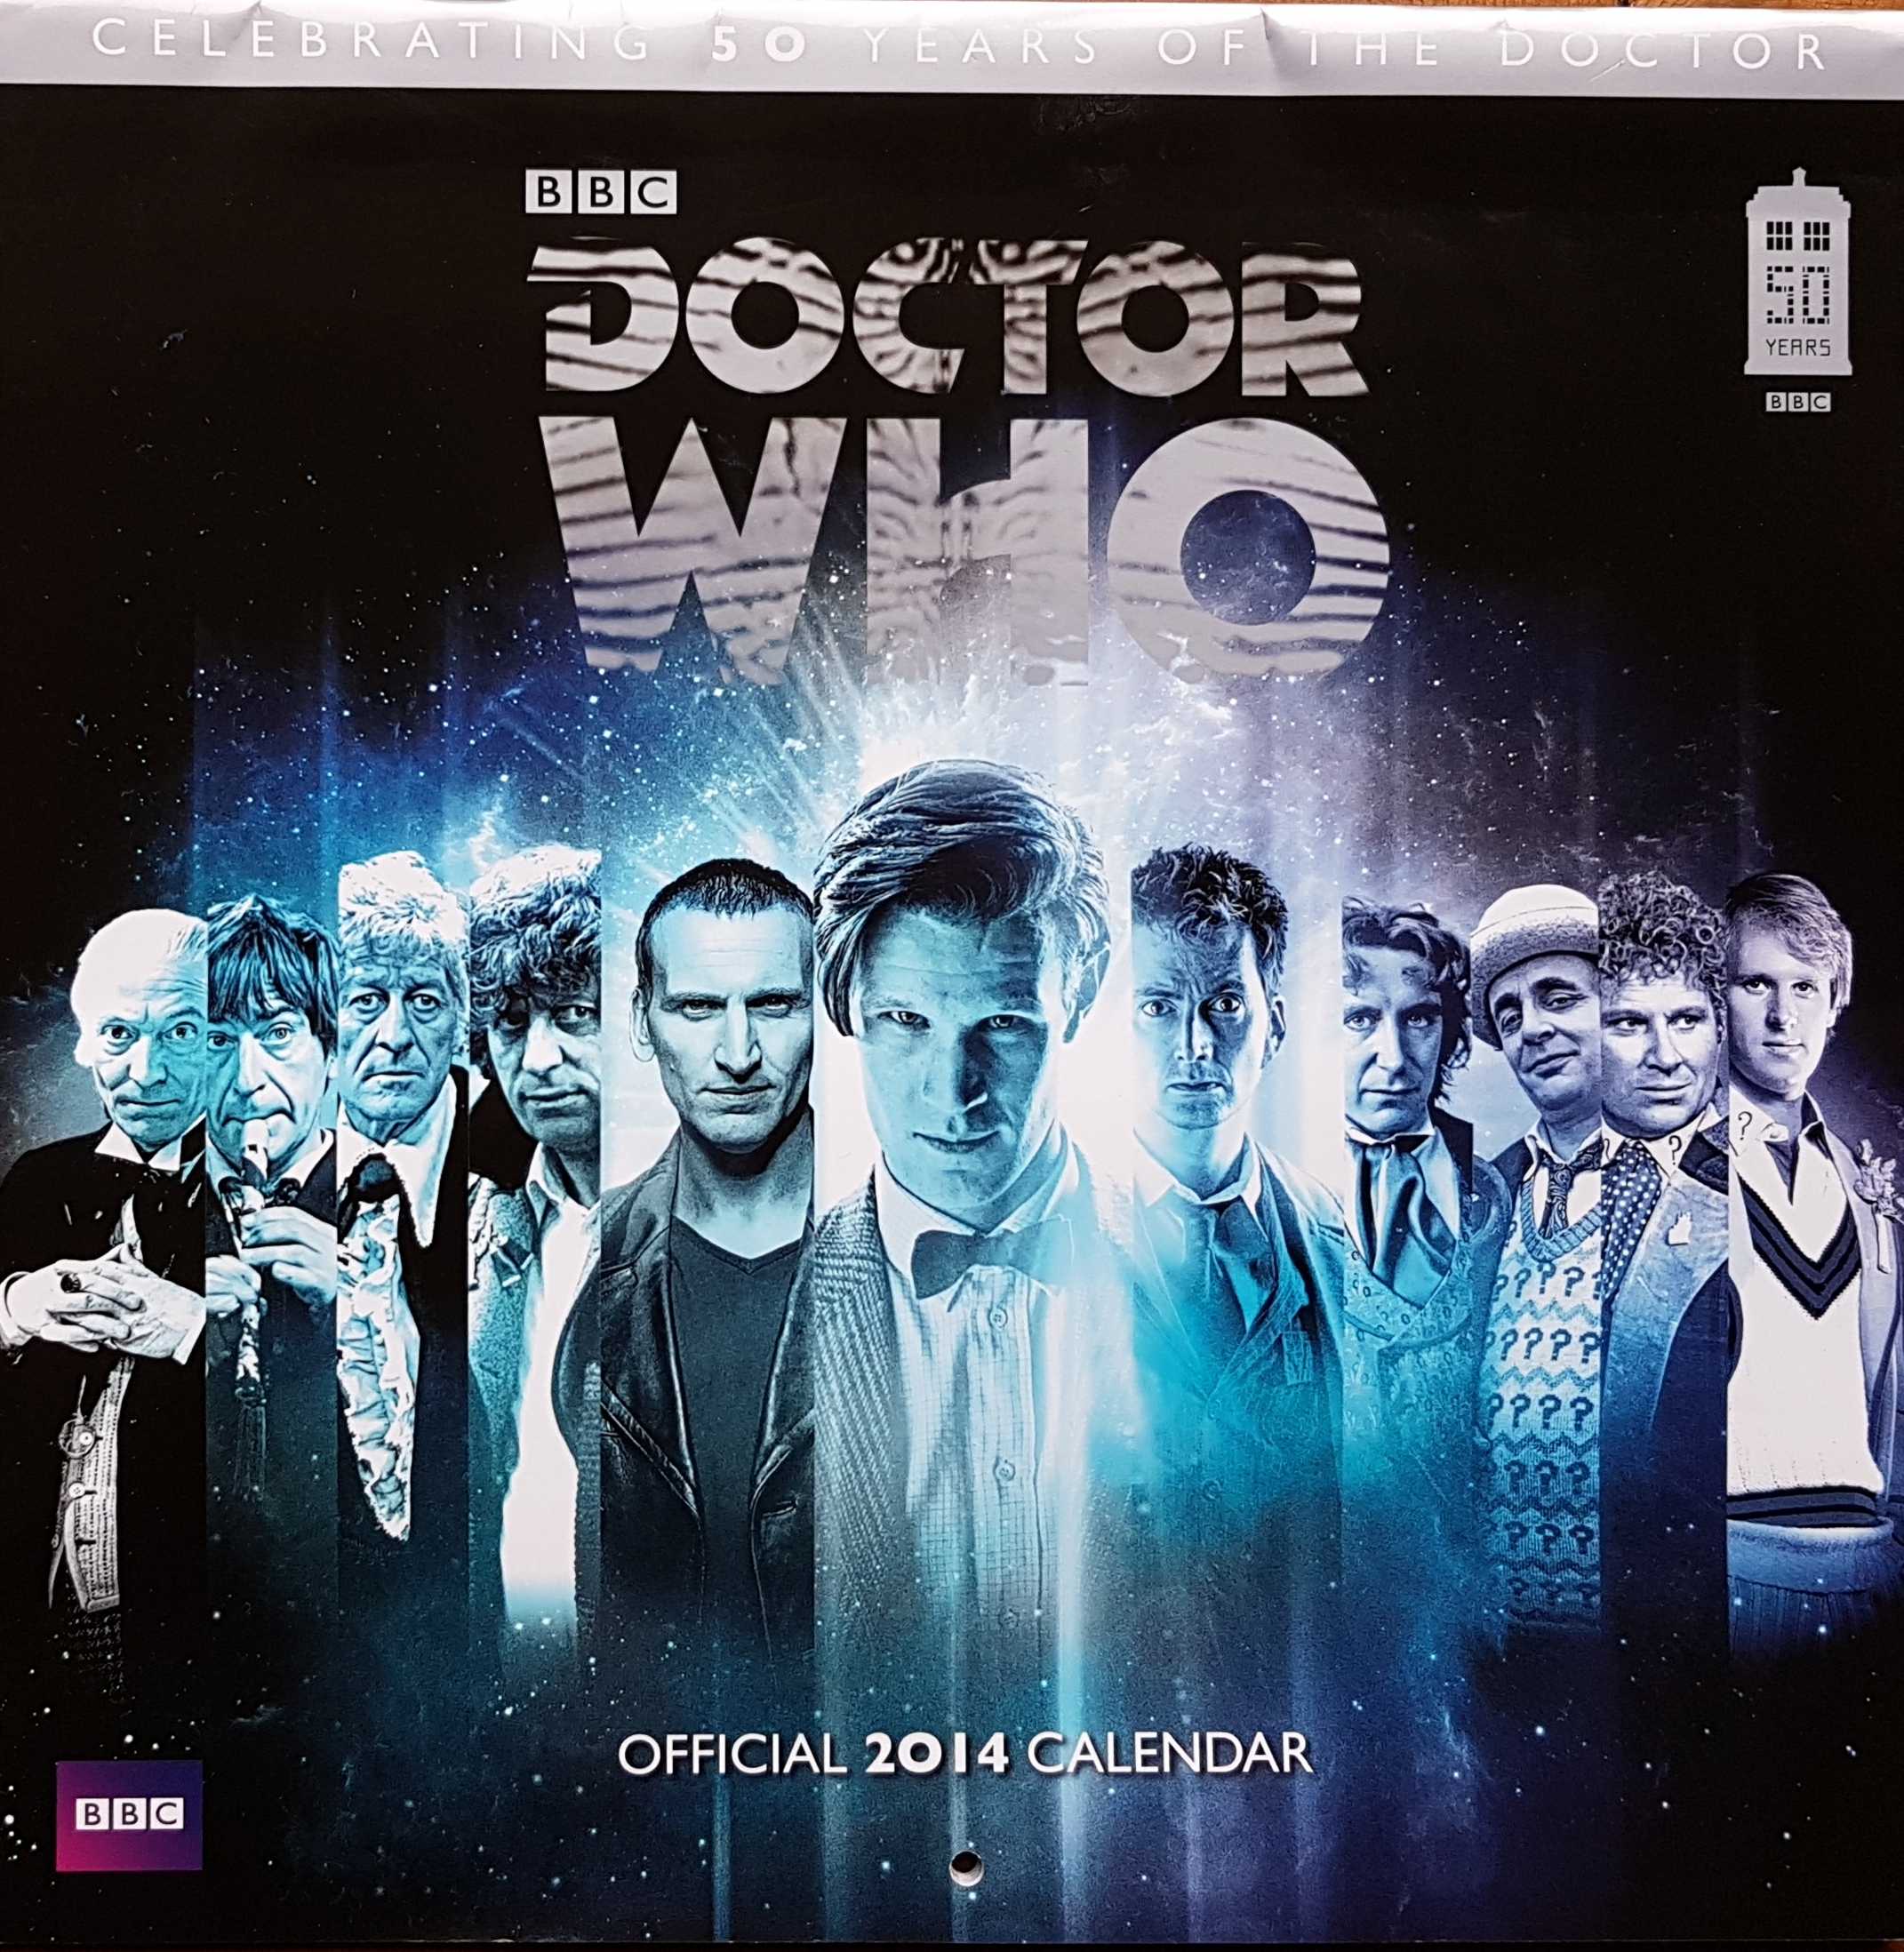 Picture of CAL-DW-2013 Doctor Who - 50th anniversary calendar by artist Unknown from the BBC records and Tapes library